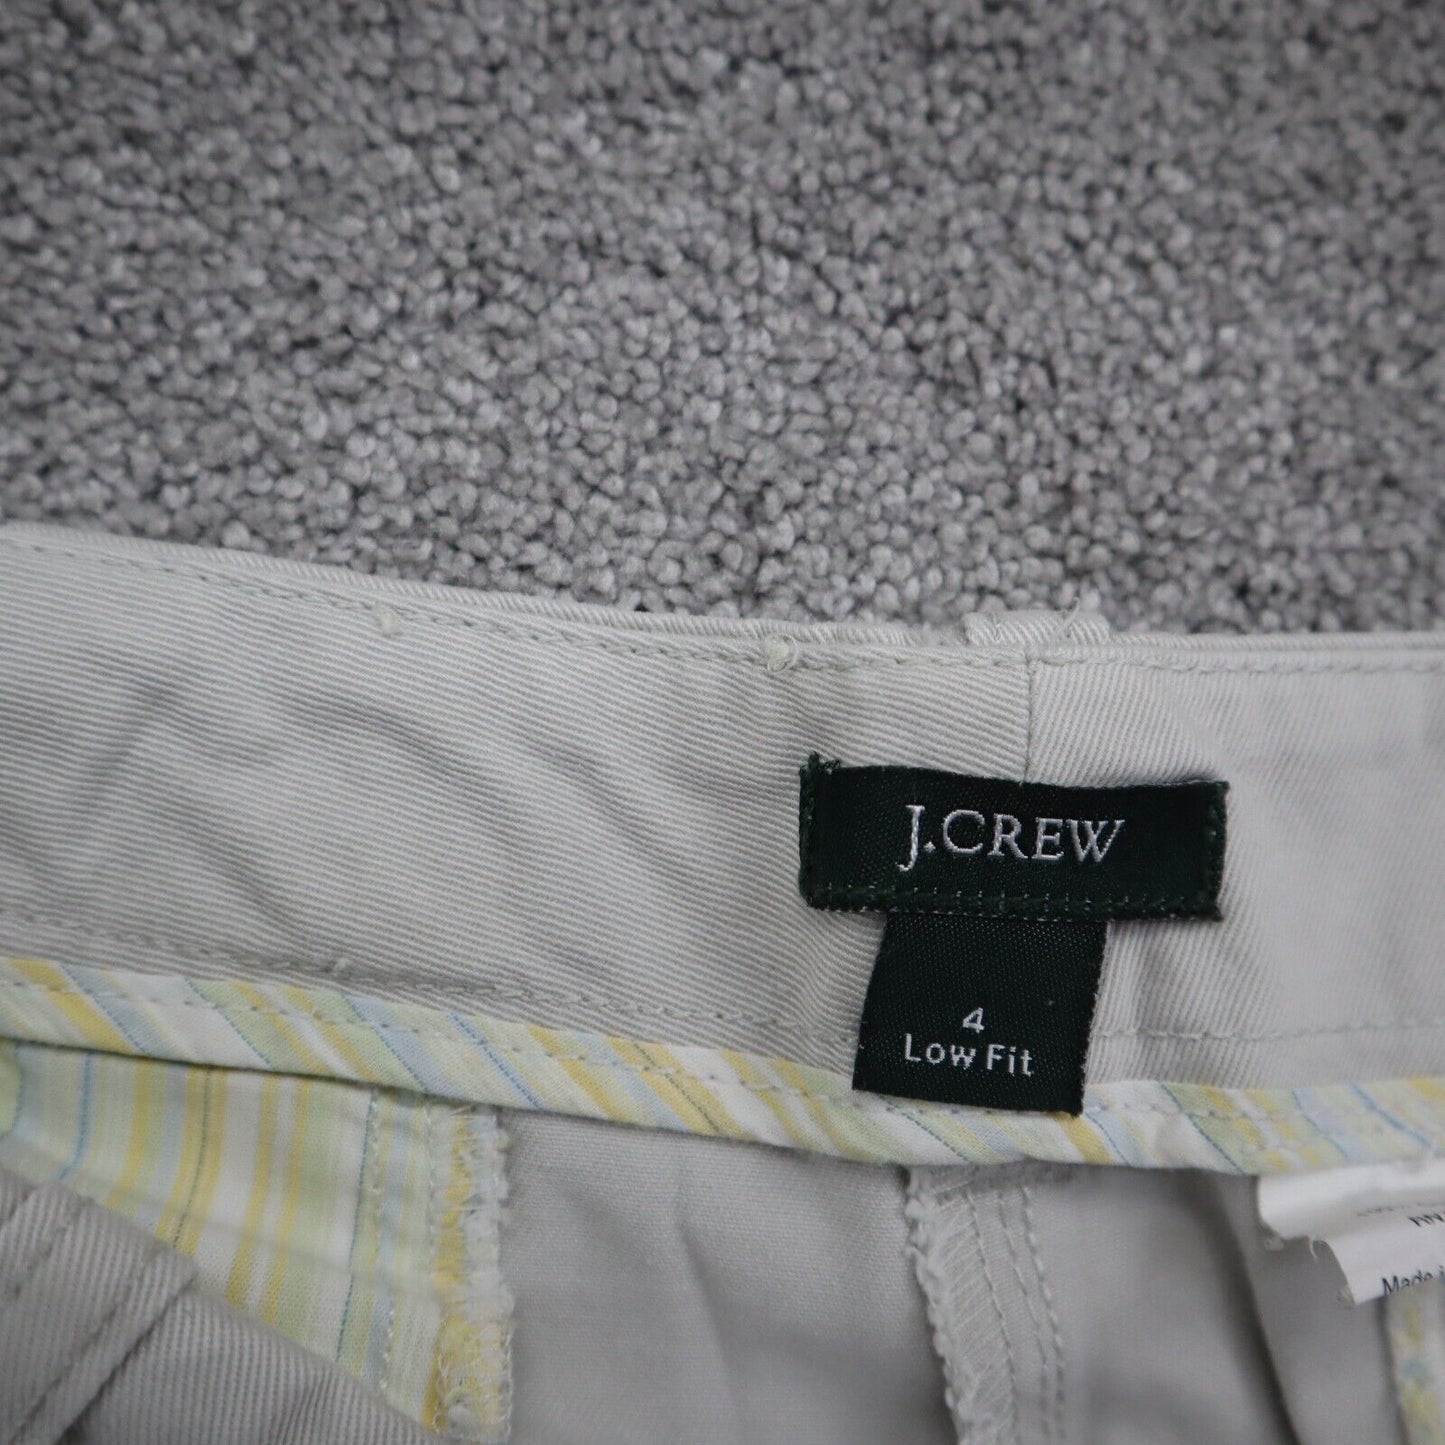 J Crew Womens Chino Shorts Mid Rise Low Fit Salish Pockets Beige Size 4